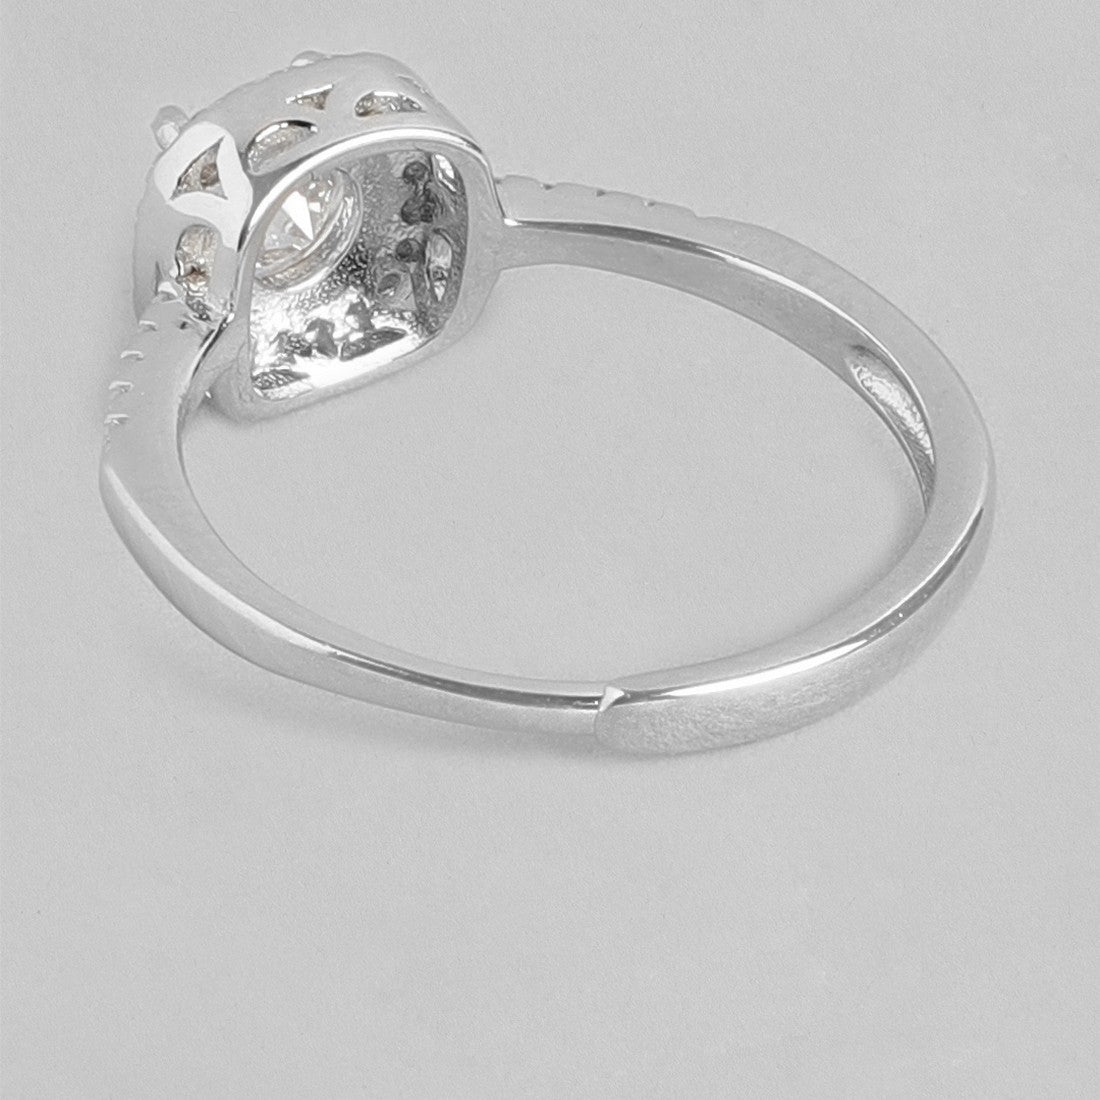 Date Night Staple Solitaire 925 Silver Ring (Adjustable)